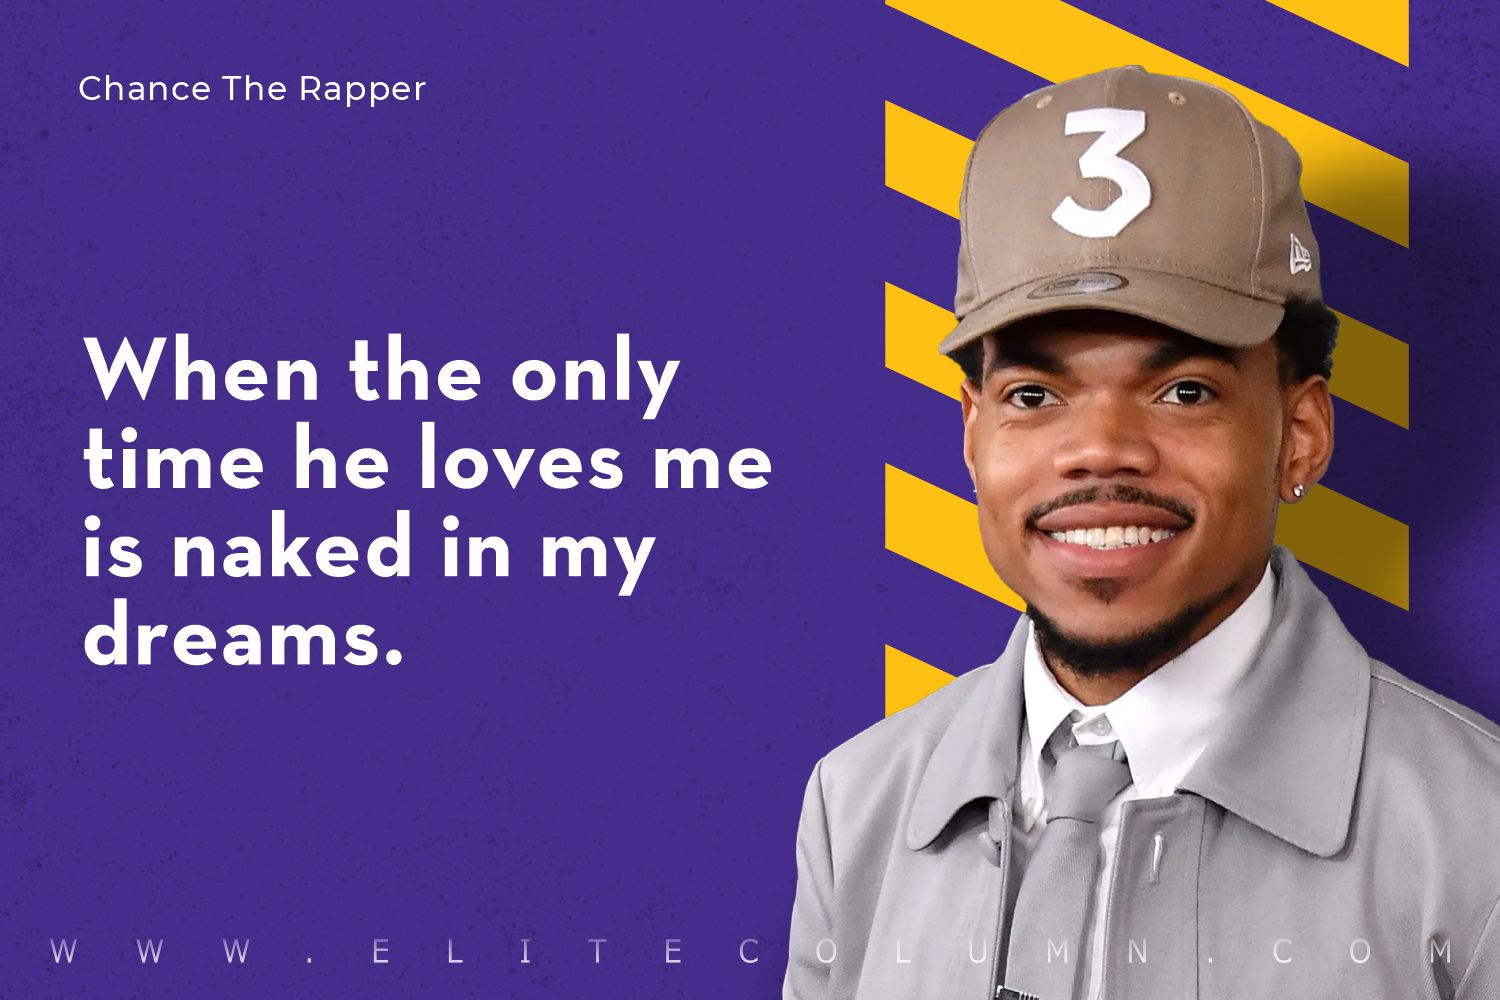 7 Chance The Rapper Quotes About Love